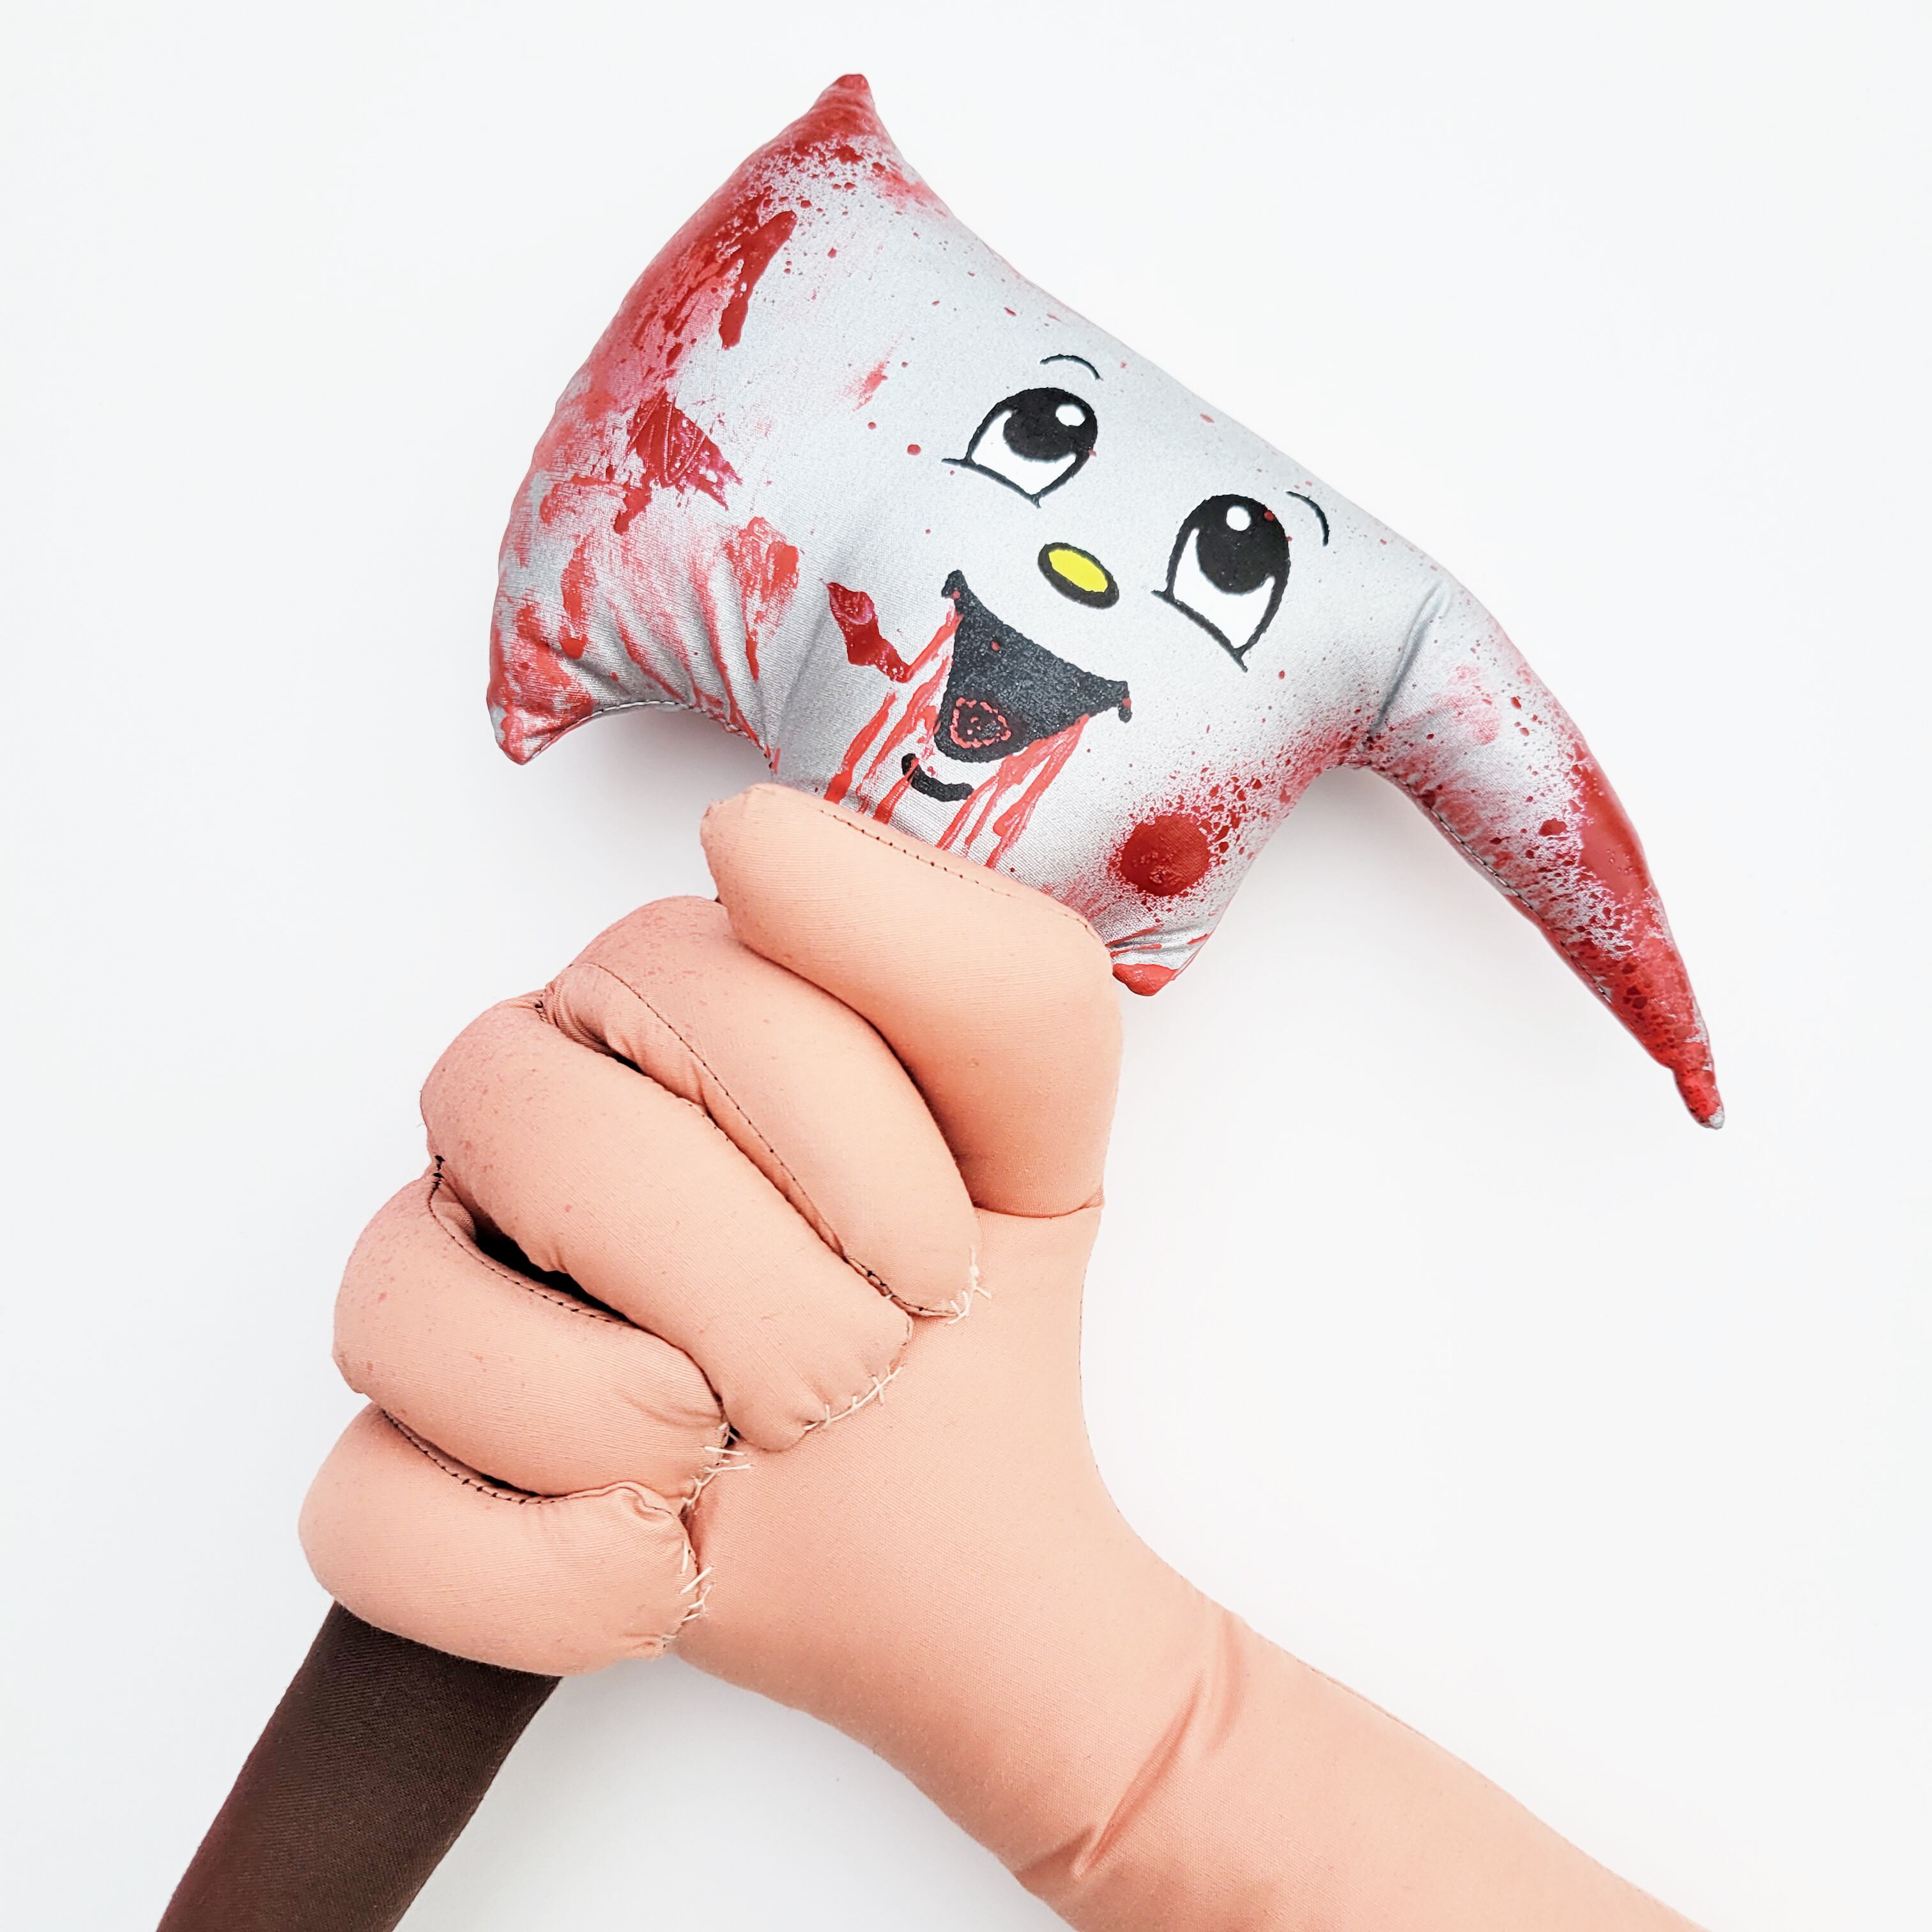 ||||| Dumb Friends "Mr. AXE and ANGRY FIST" PLUSH TOY